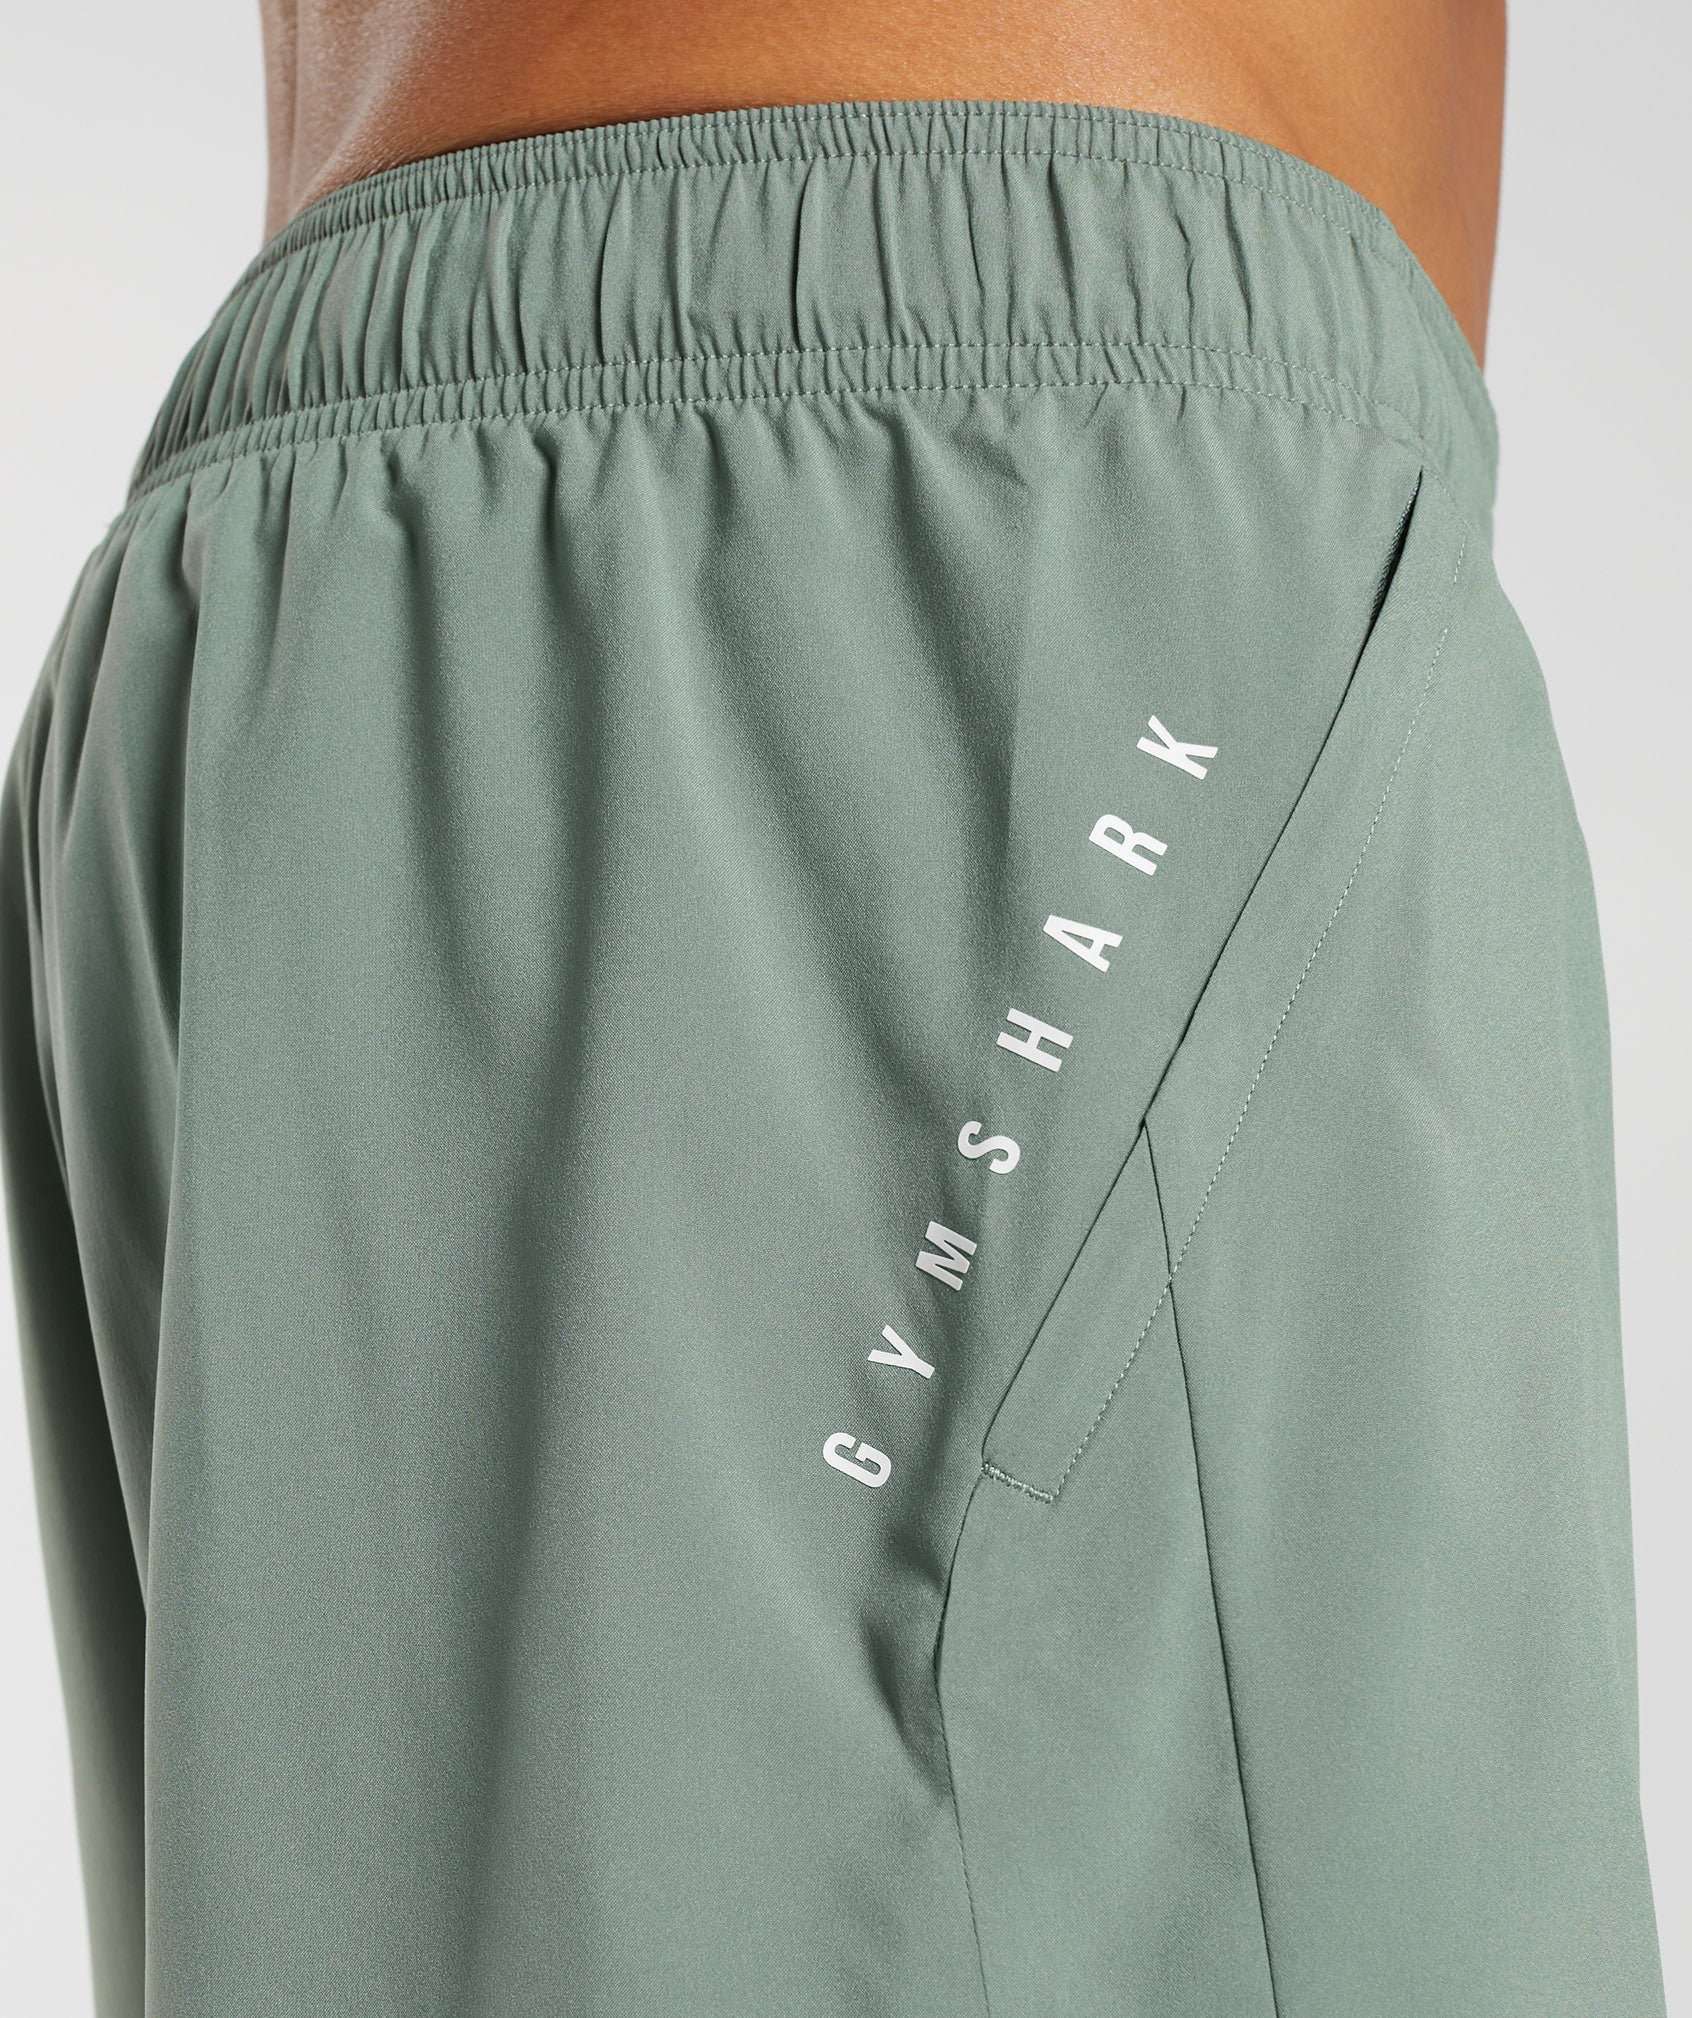 Sport 5" 2 In 1 Shorts in Willow Green/Desert Sage Green - view 5